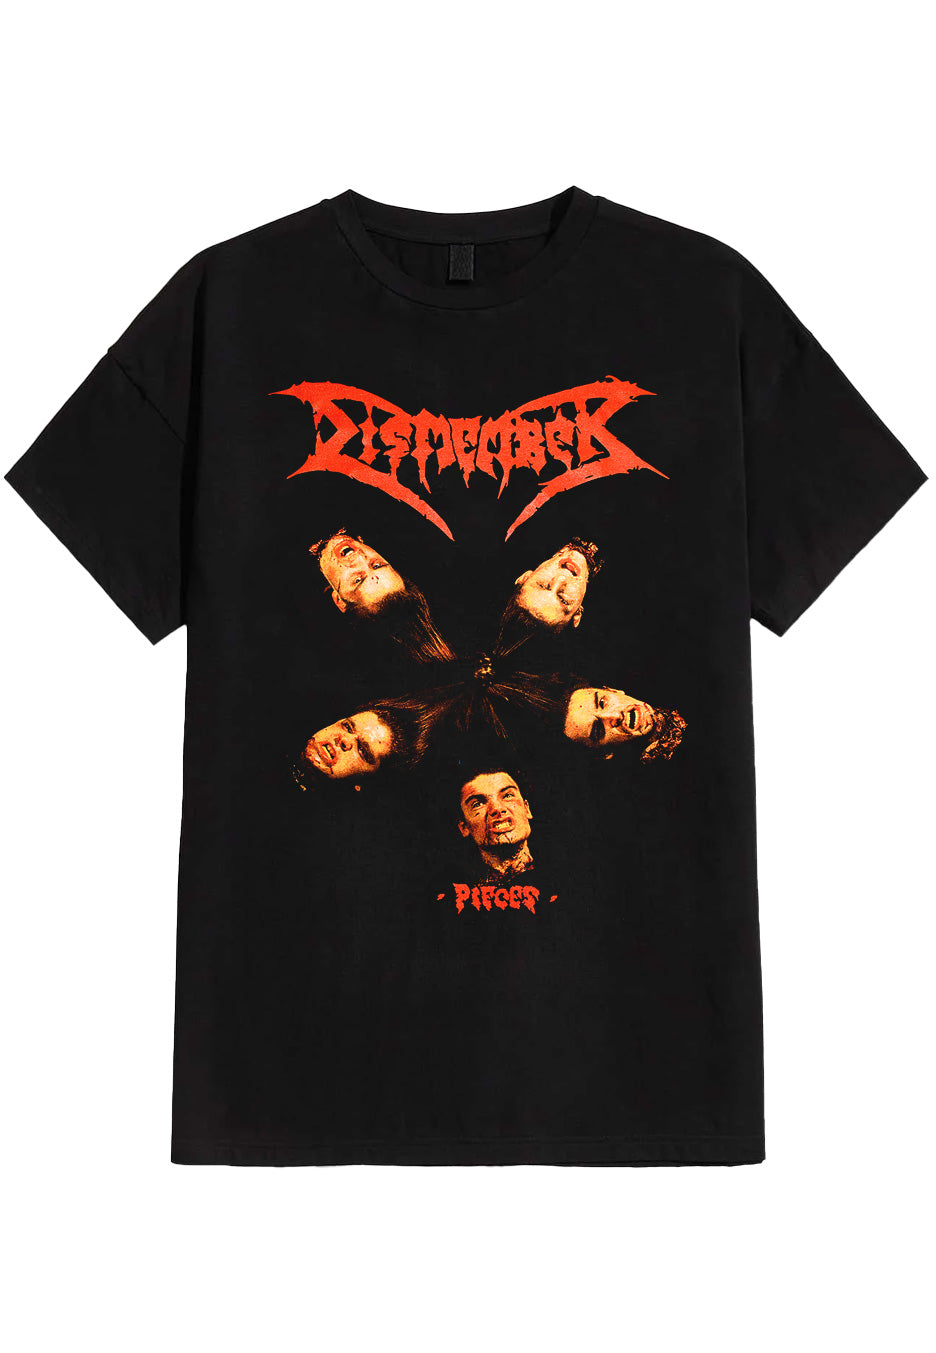 Dismember - Pieces - T-Shirt